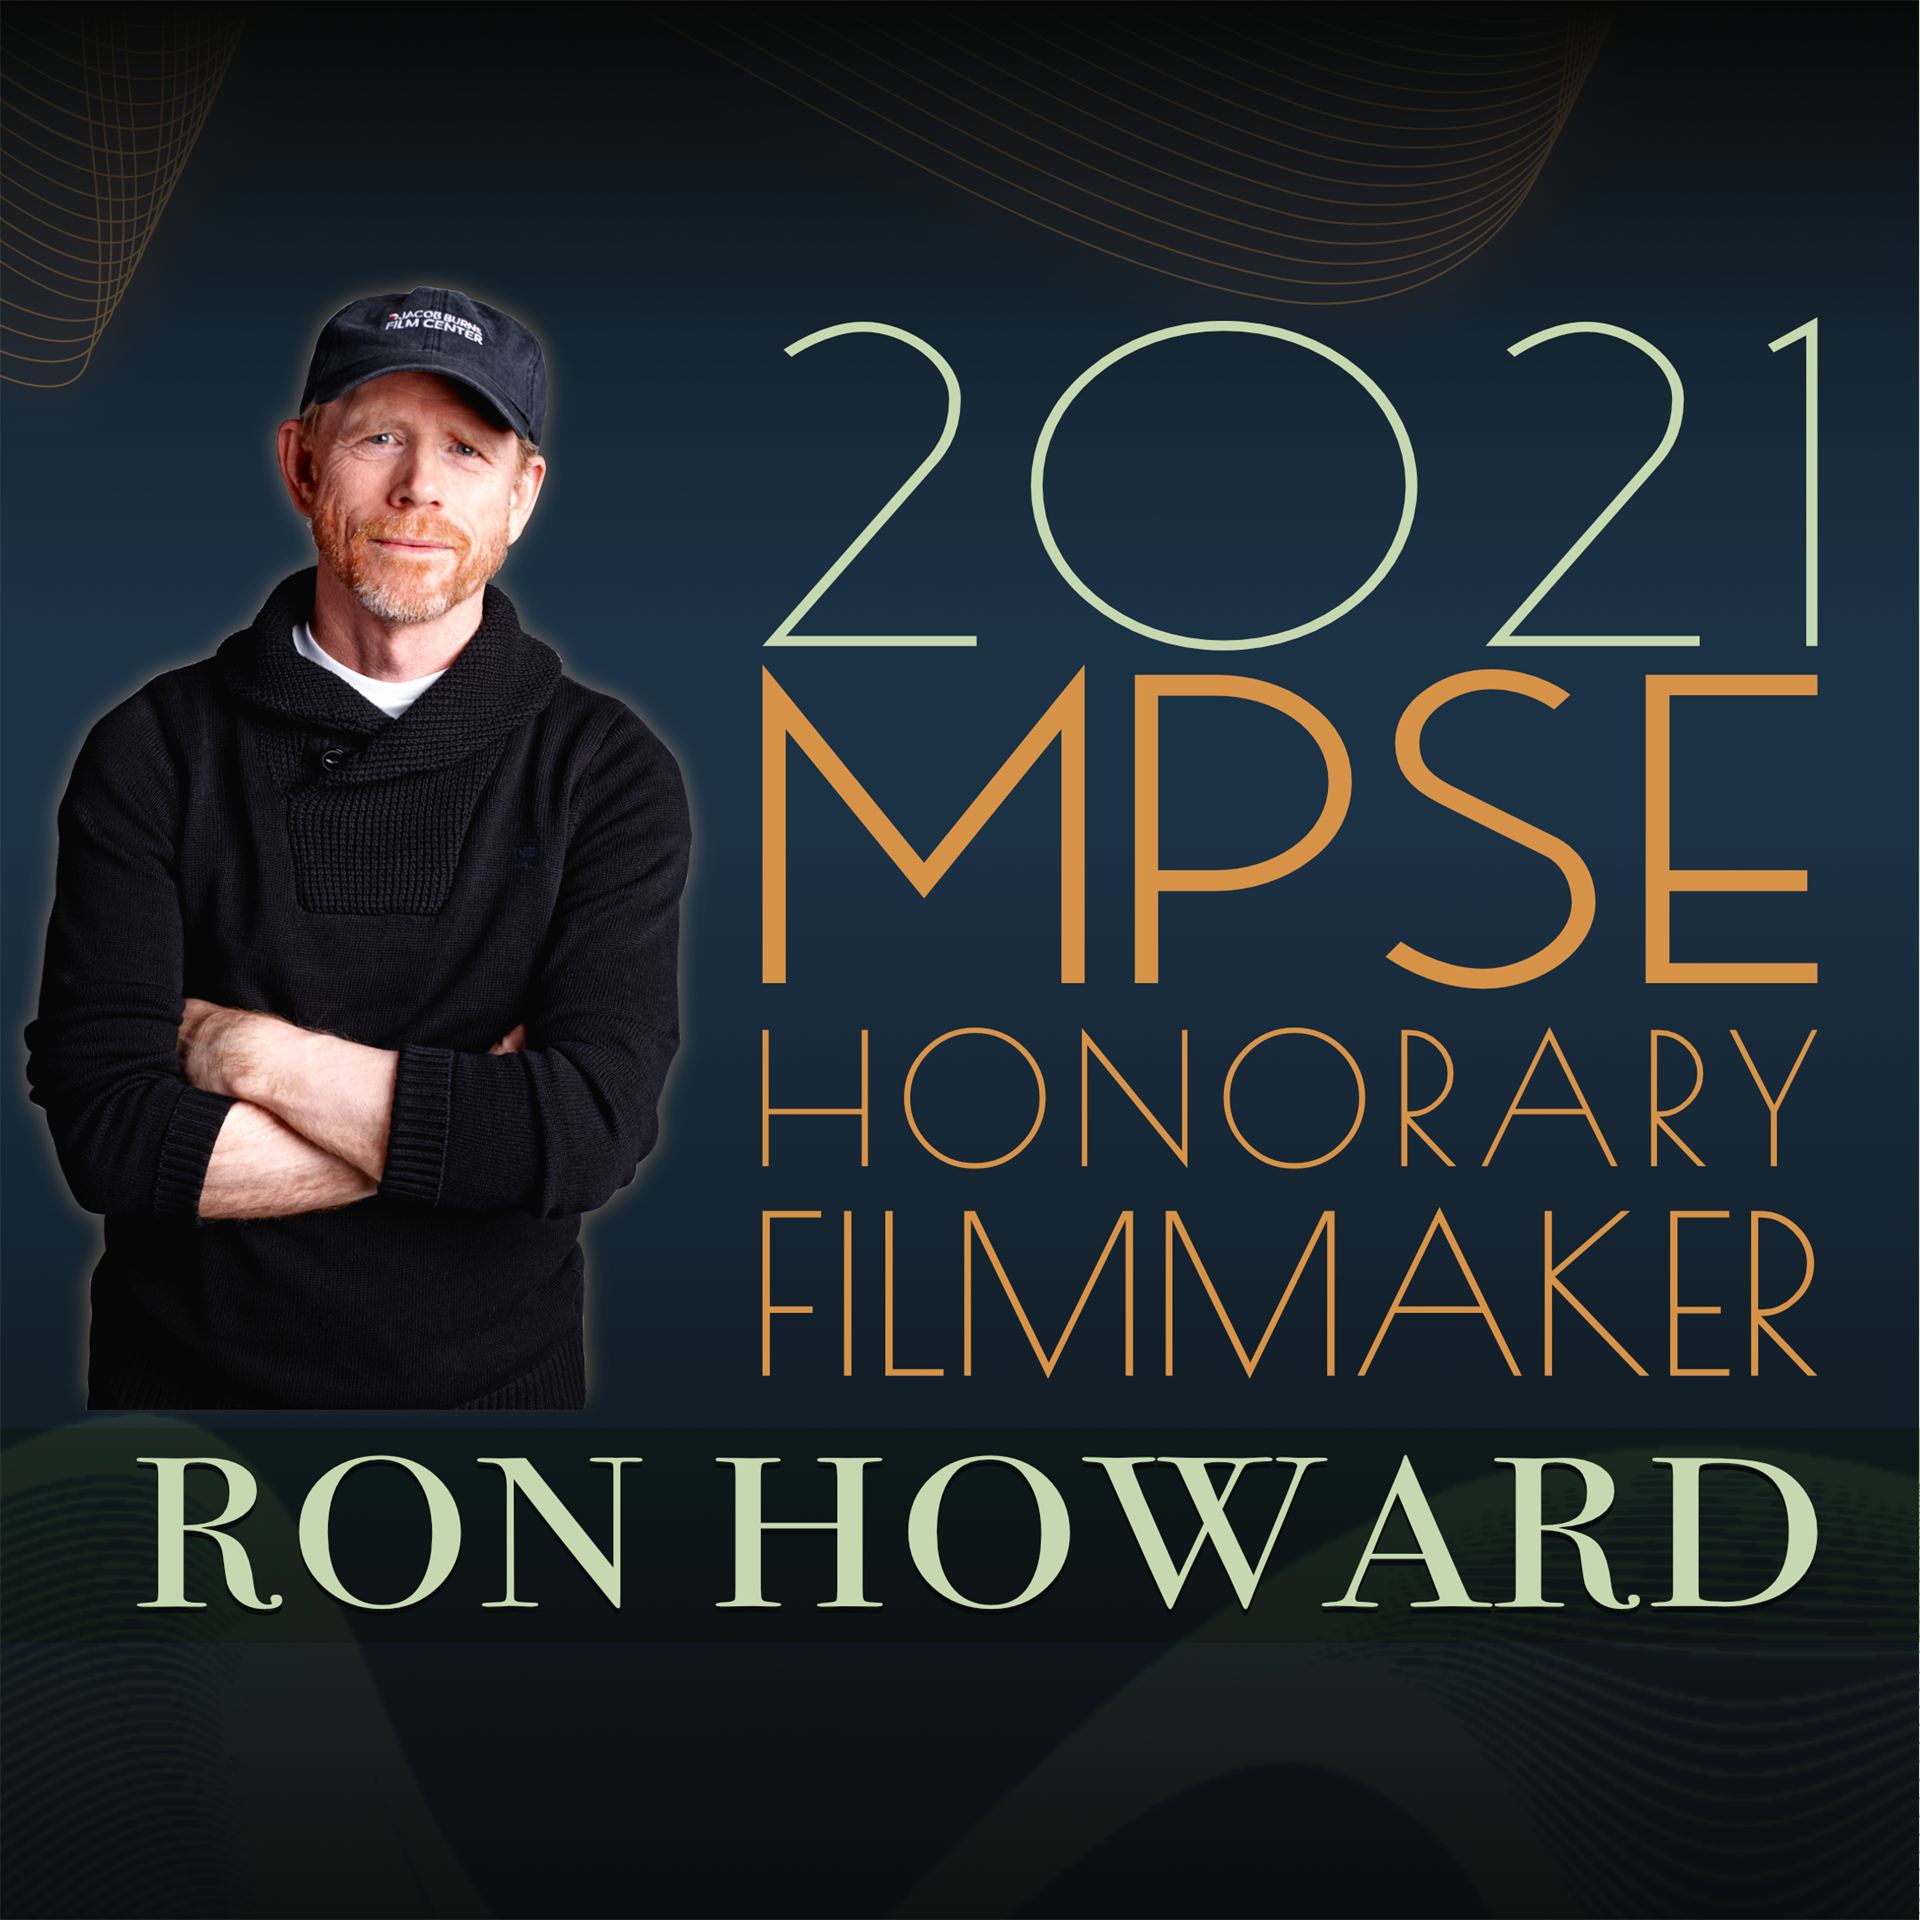 2021 MPSE Honorary Filmaker Ron Howard with photo standing with arms crossed